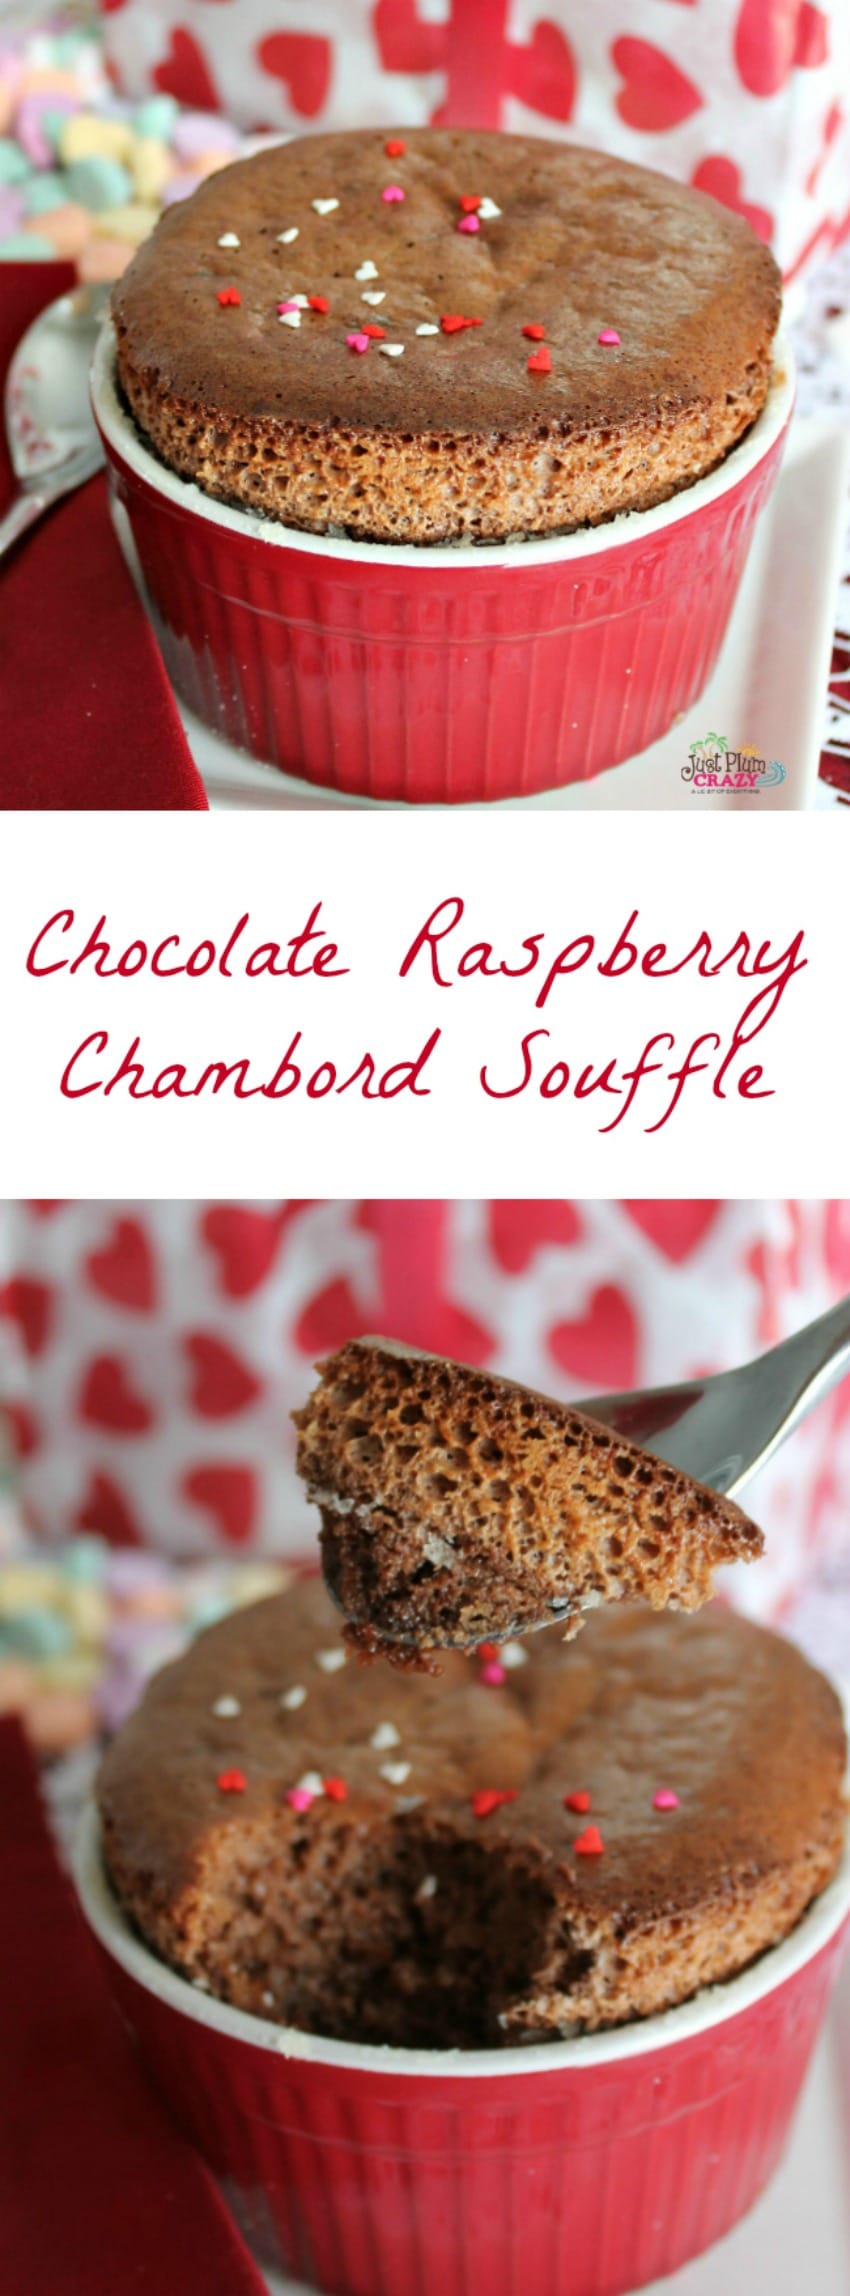 If you’re cooking a romantic dinner for your Valentine this year, you’ll want to finish the meal with these warm, creamy, sinfully good Chocolate Raspberry Chambord Souffle Recipe. 